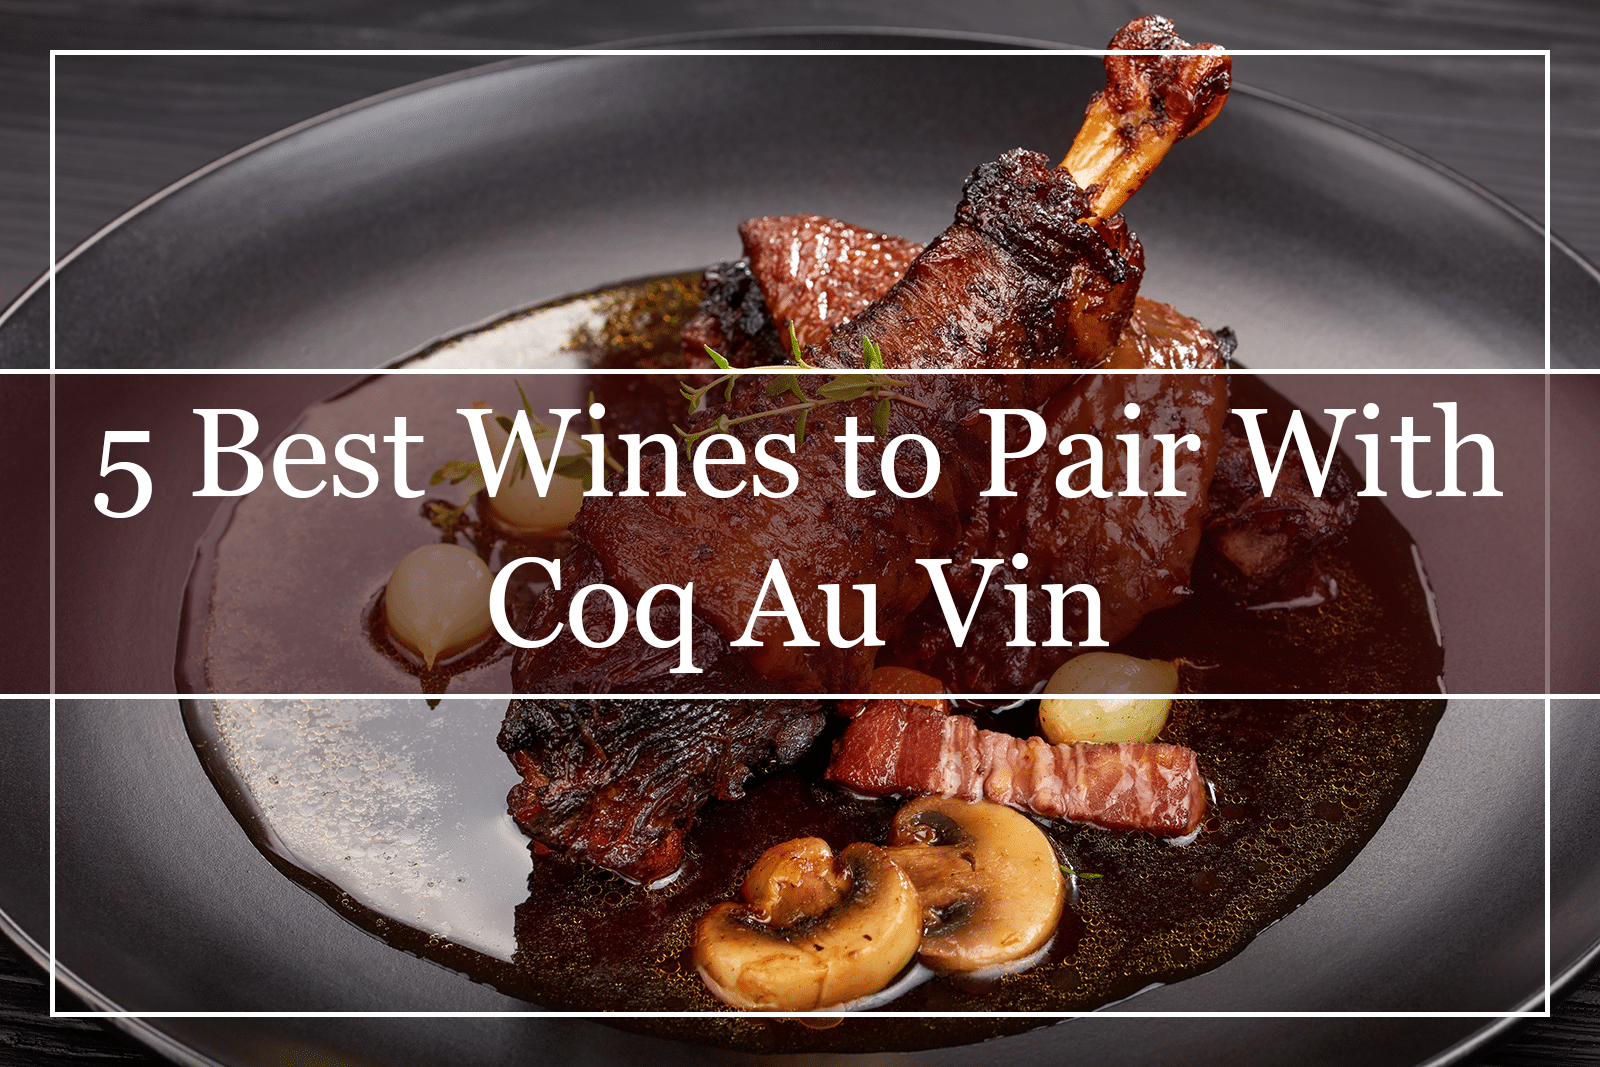 5 Best Wines to Pair With Coq Au Vin (2021)